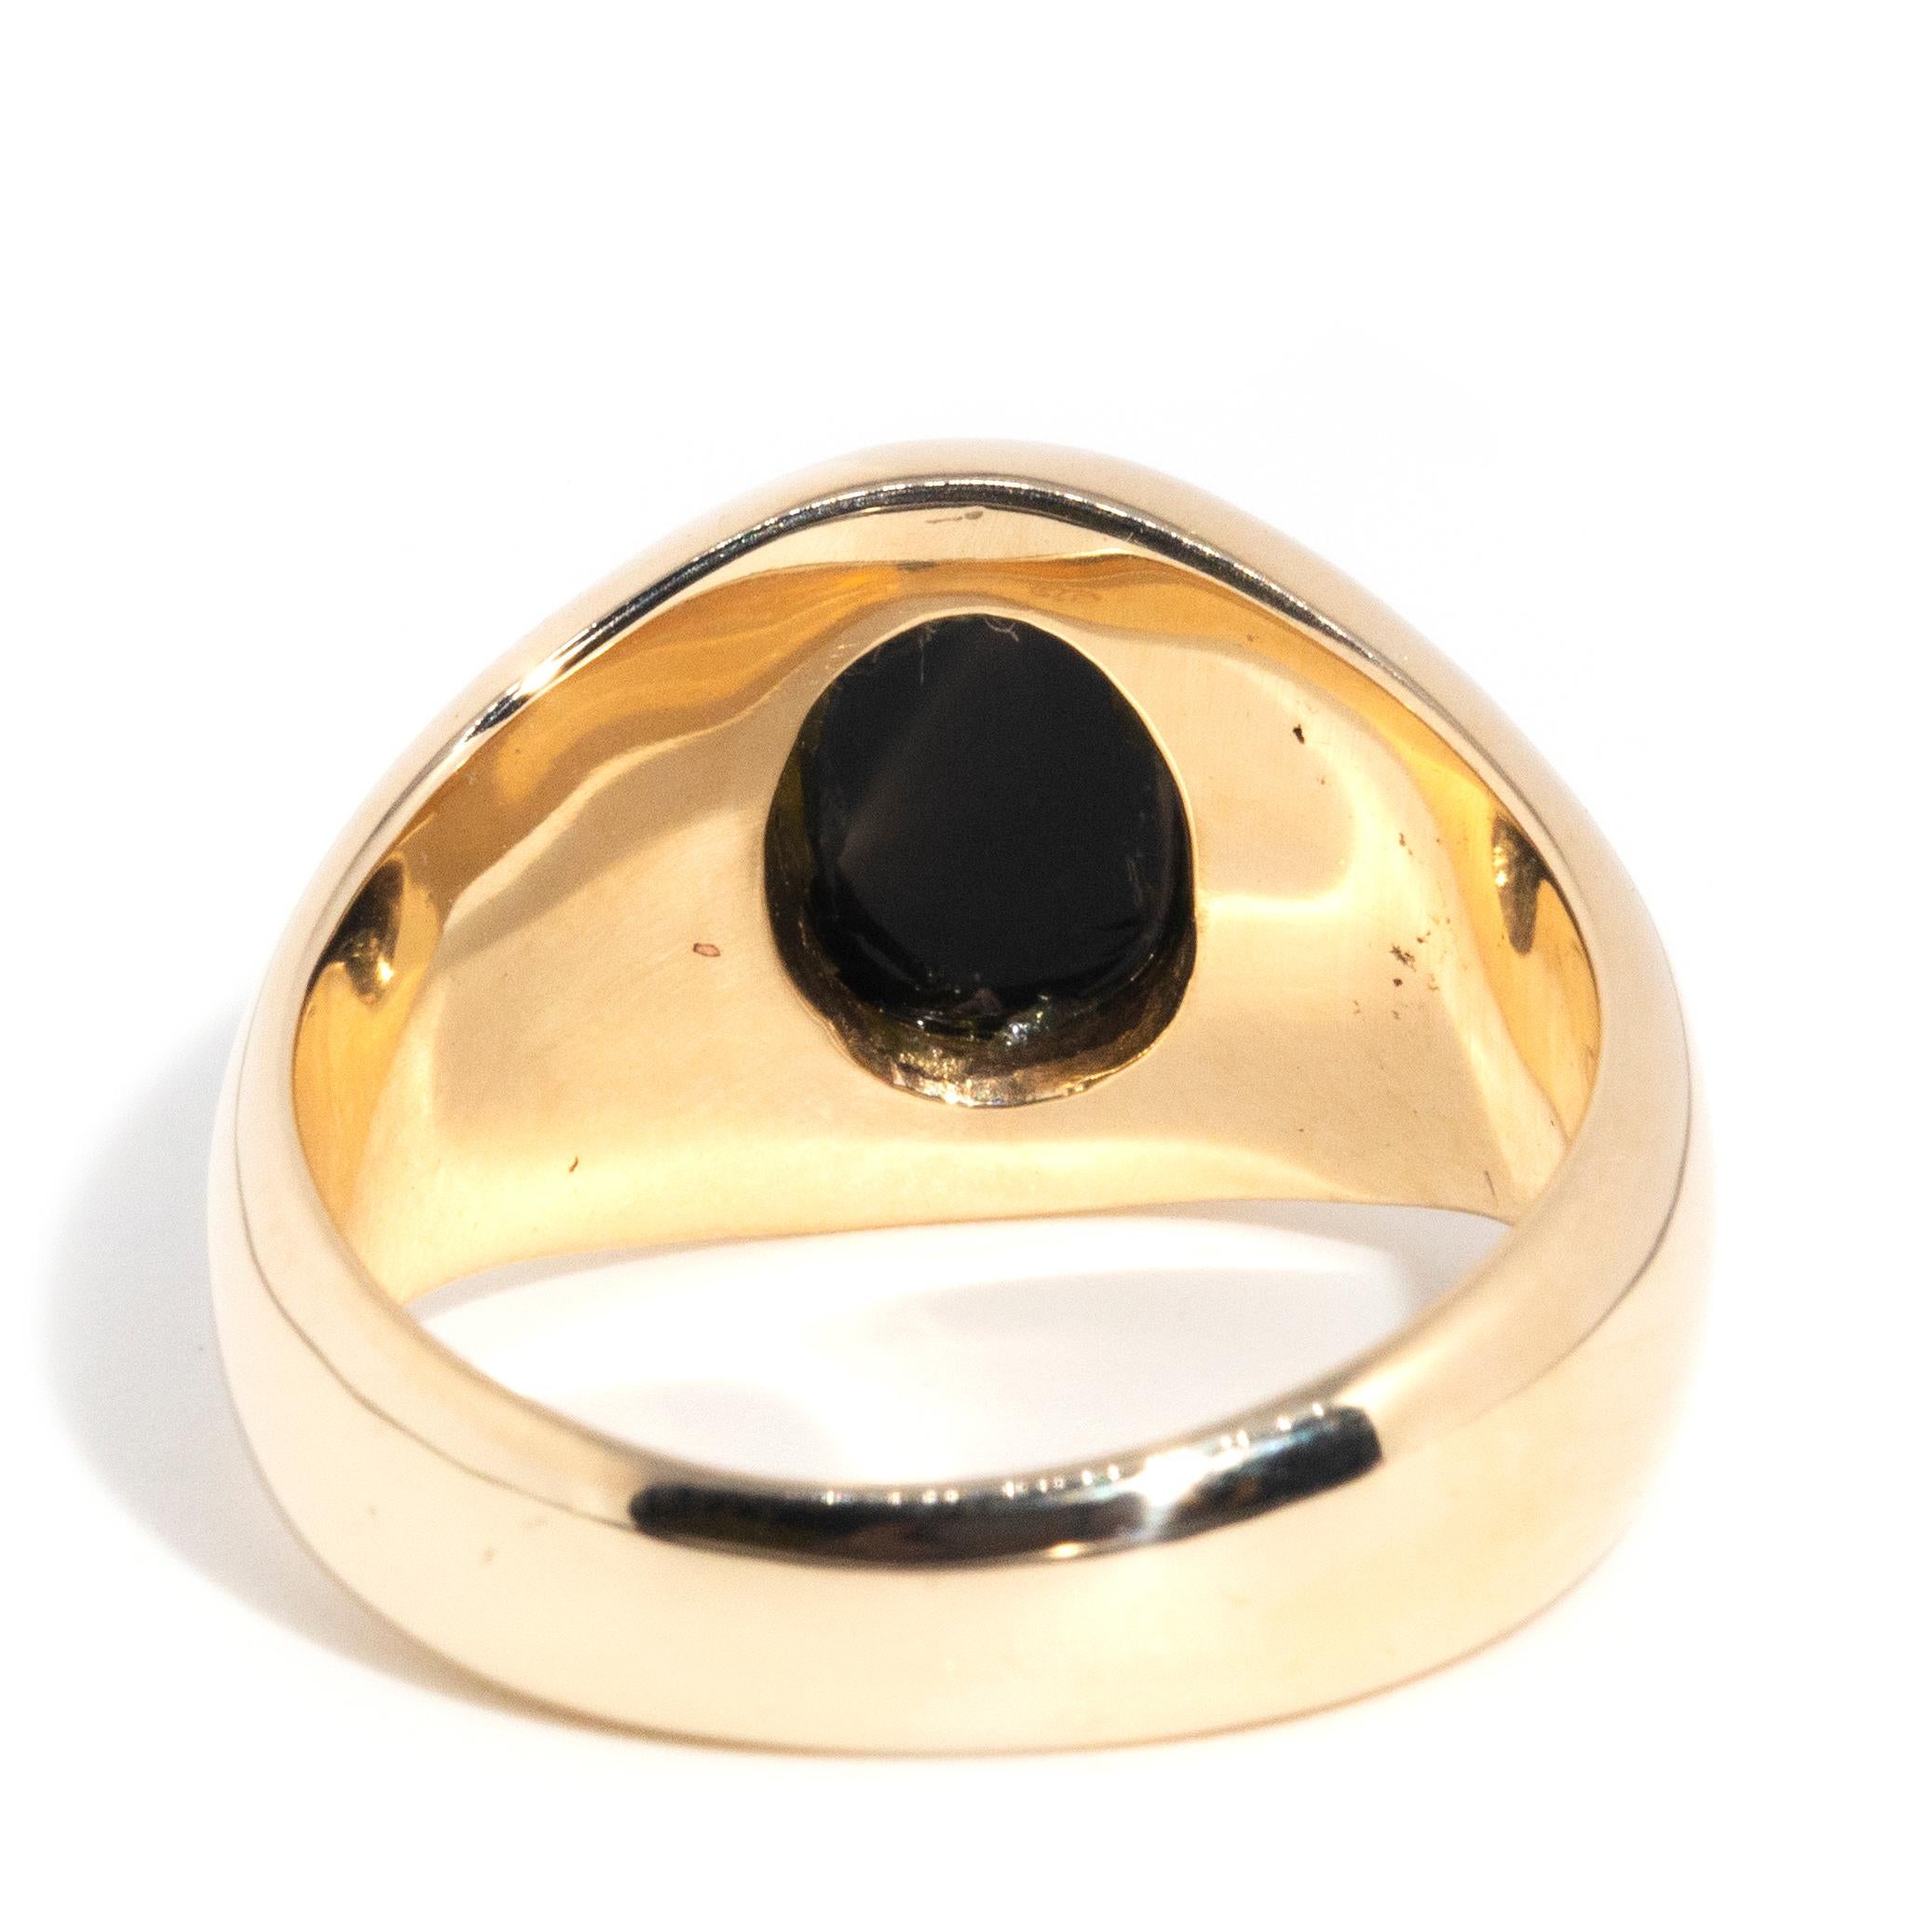 Vintage Circa 1980s 9 Carat Yellow Gold Oval Cut Onyx Domed Men's Signet Ring 1